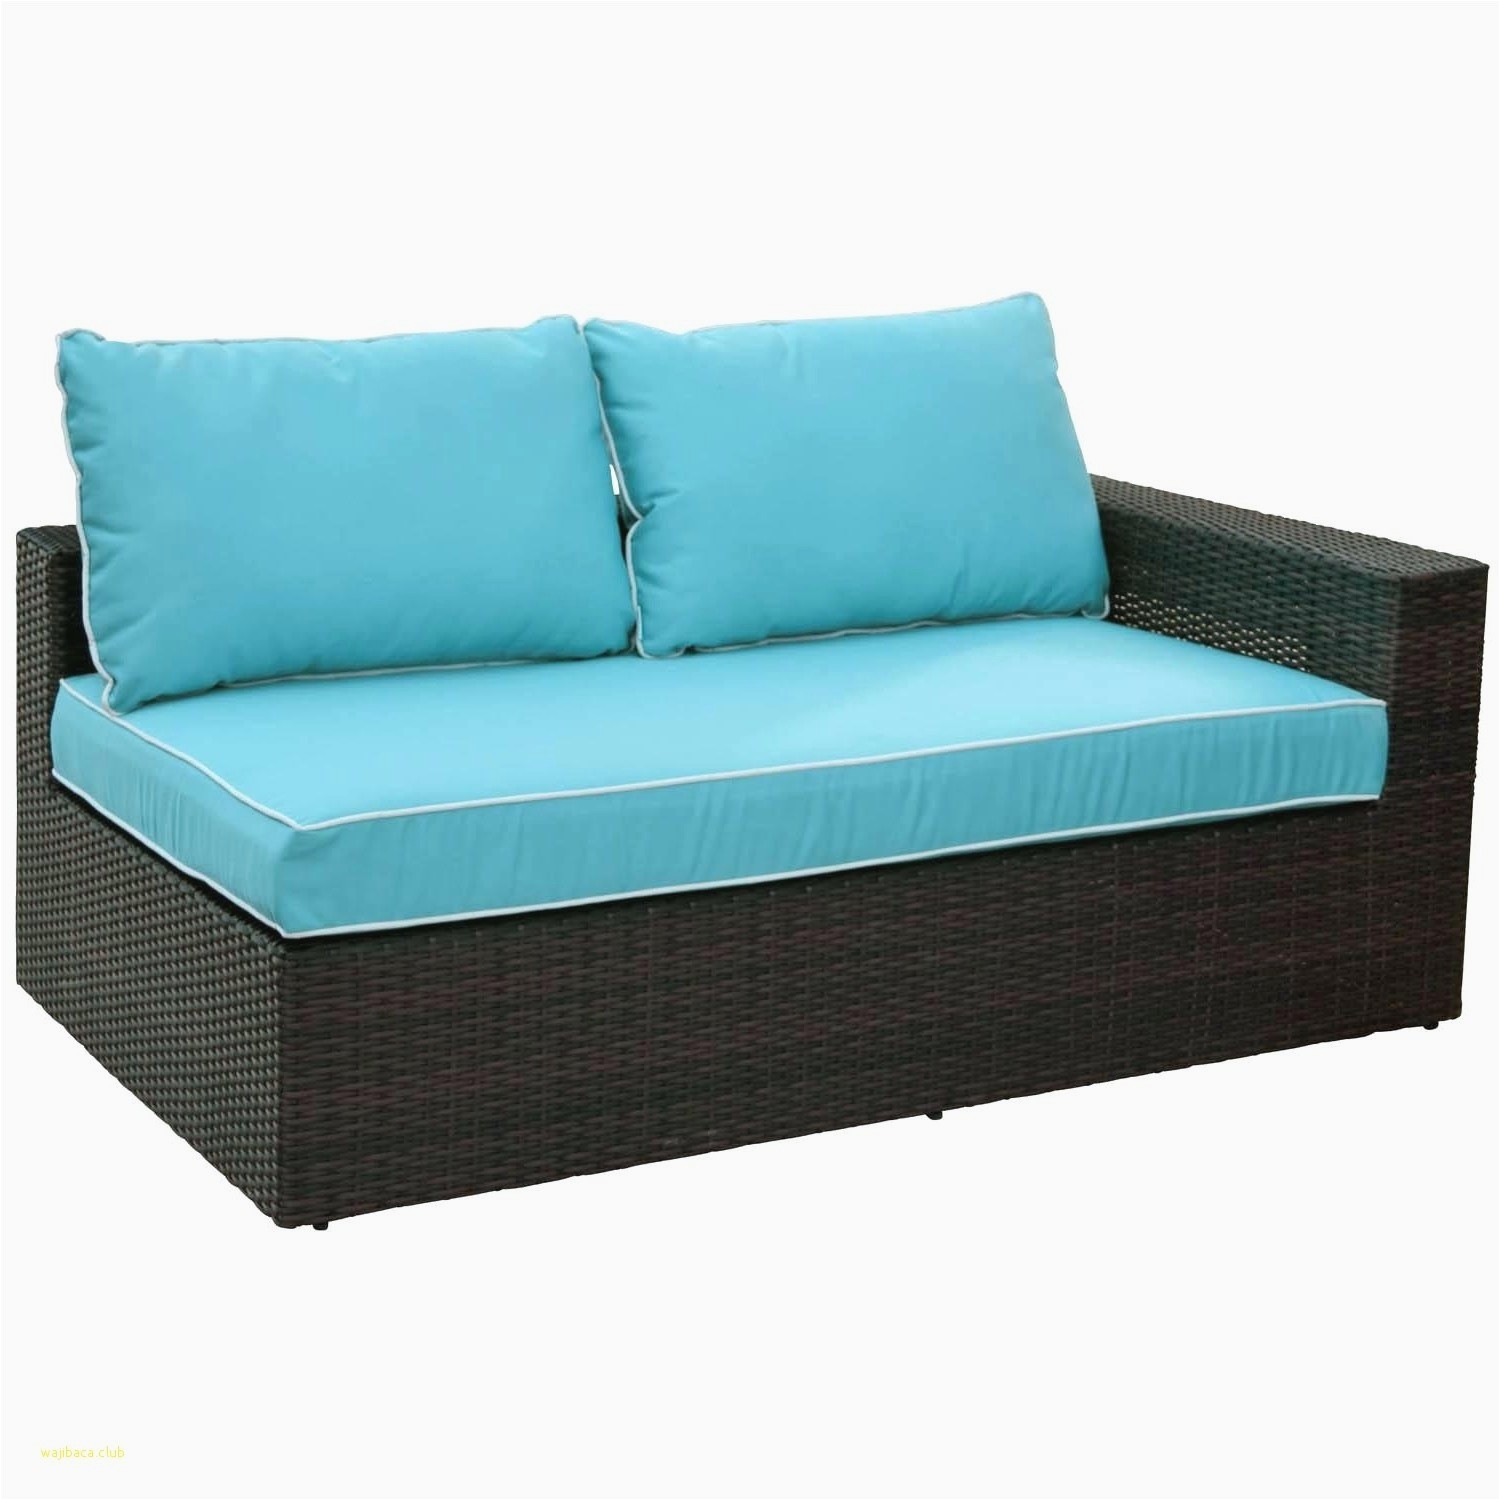 Places that Give Away Free Furniture 28 Fresh Of Free Patio Furniture Pics Home Furniture Ideas